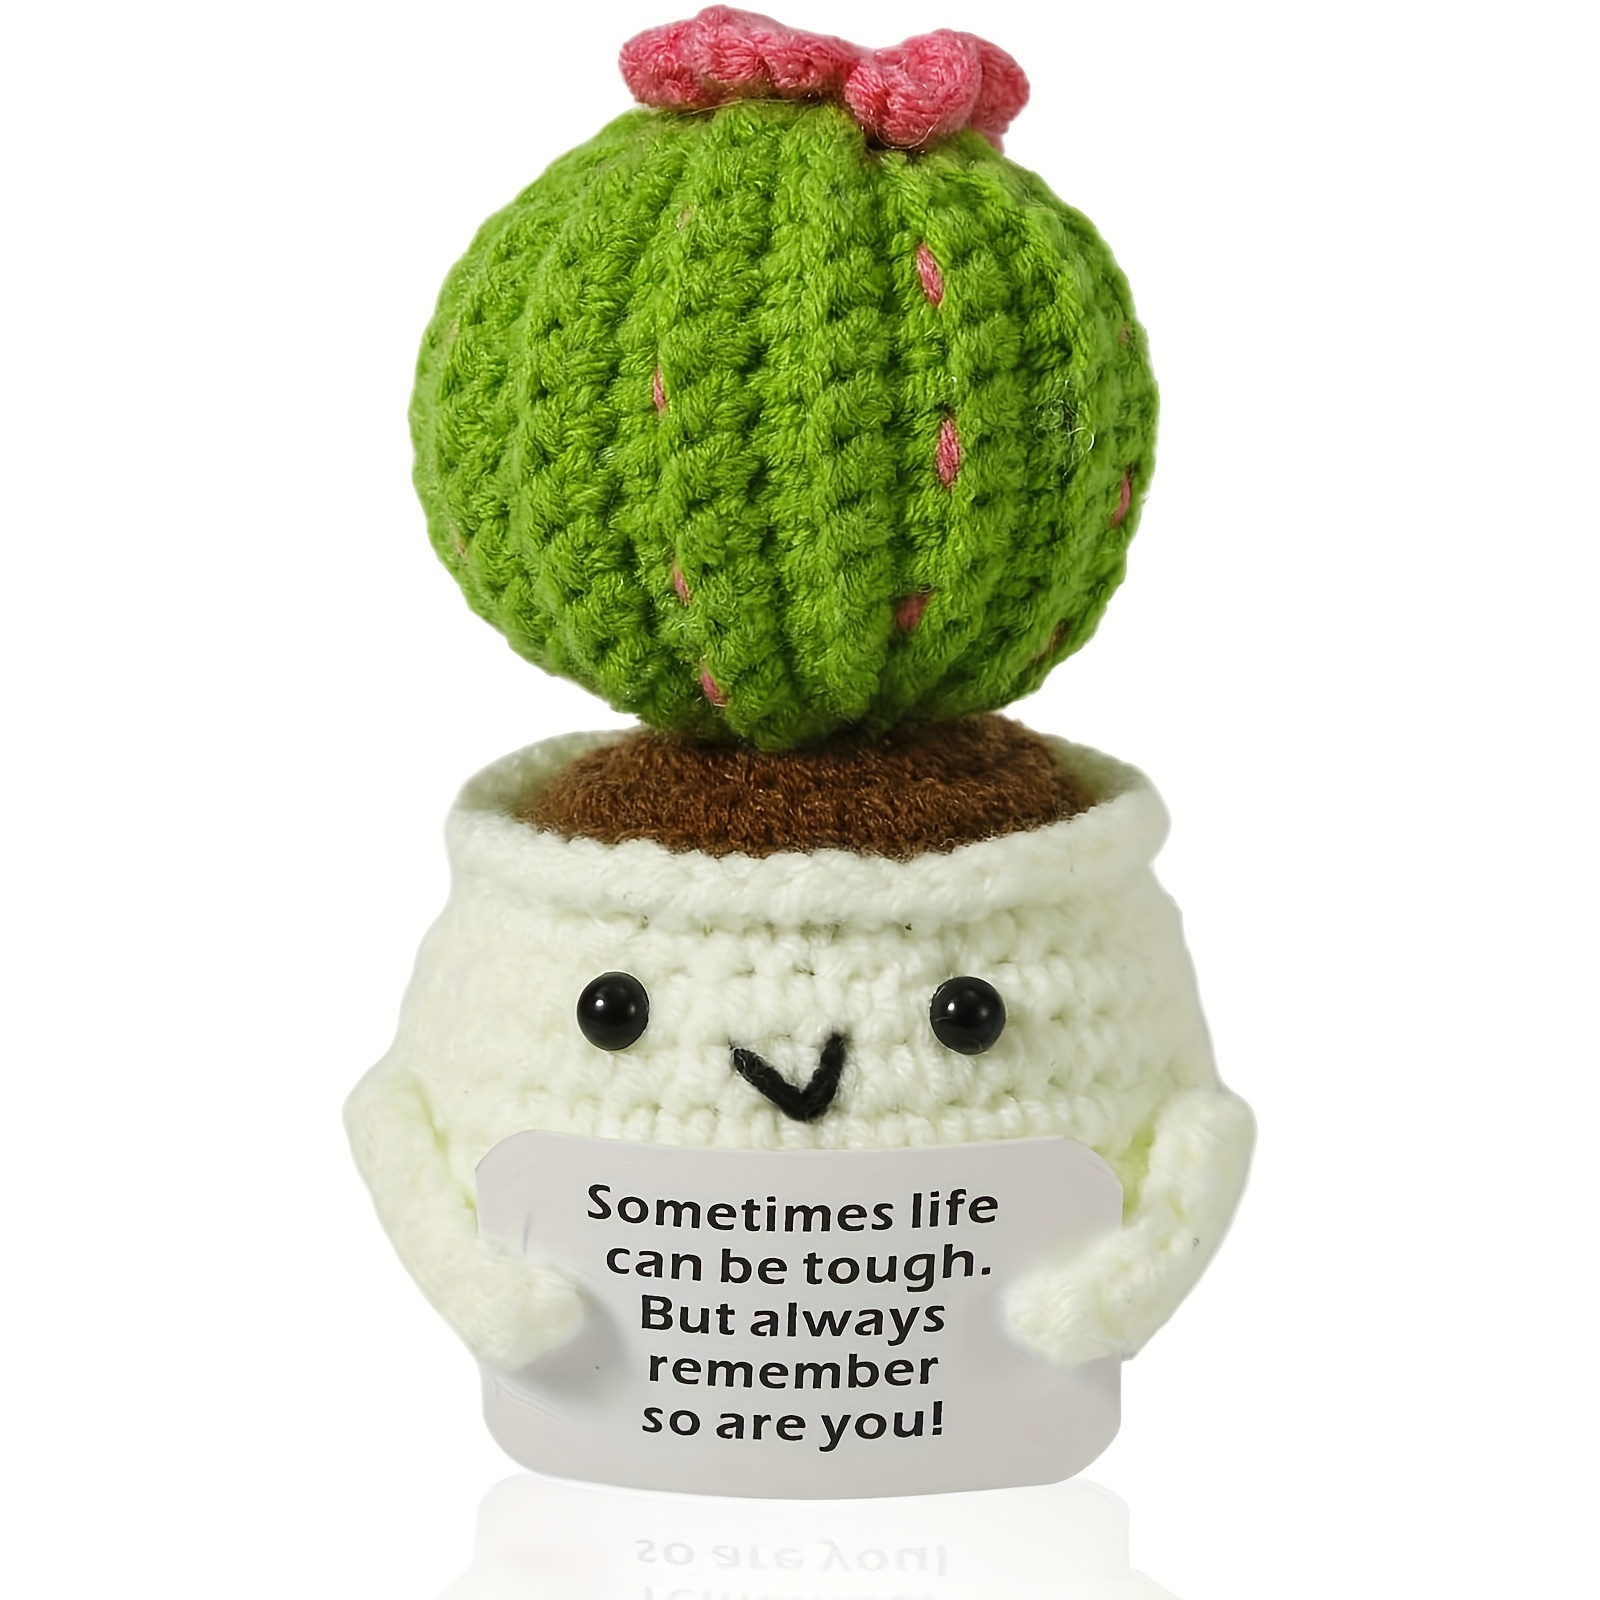 

10cm Crochet Positive Cactus, Handmade Knitted Cactus Toy Cute Funny Potato Emotional Positive Life Doll Ornaments Gifts With Encouraging Card For Adults Friends Room Office Desktop Decor